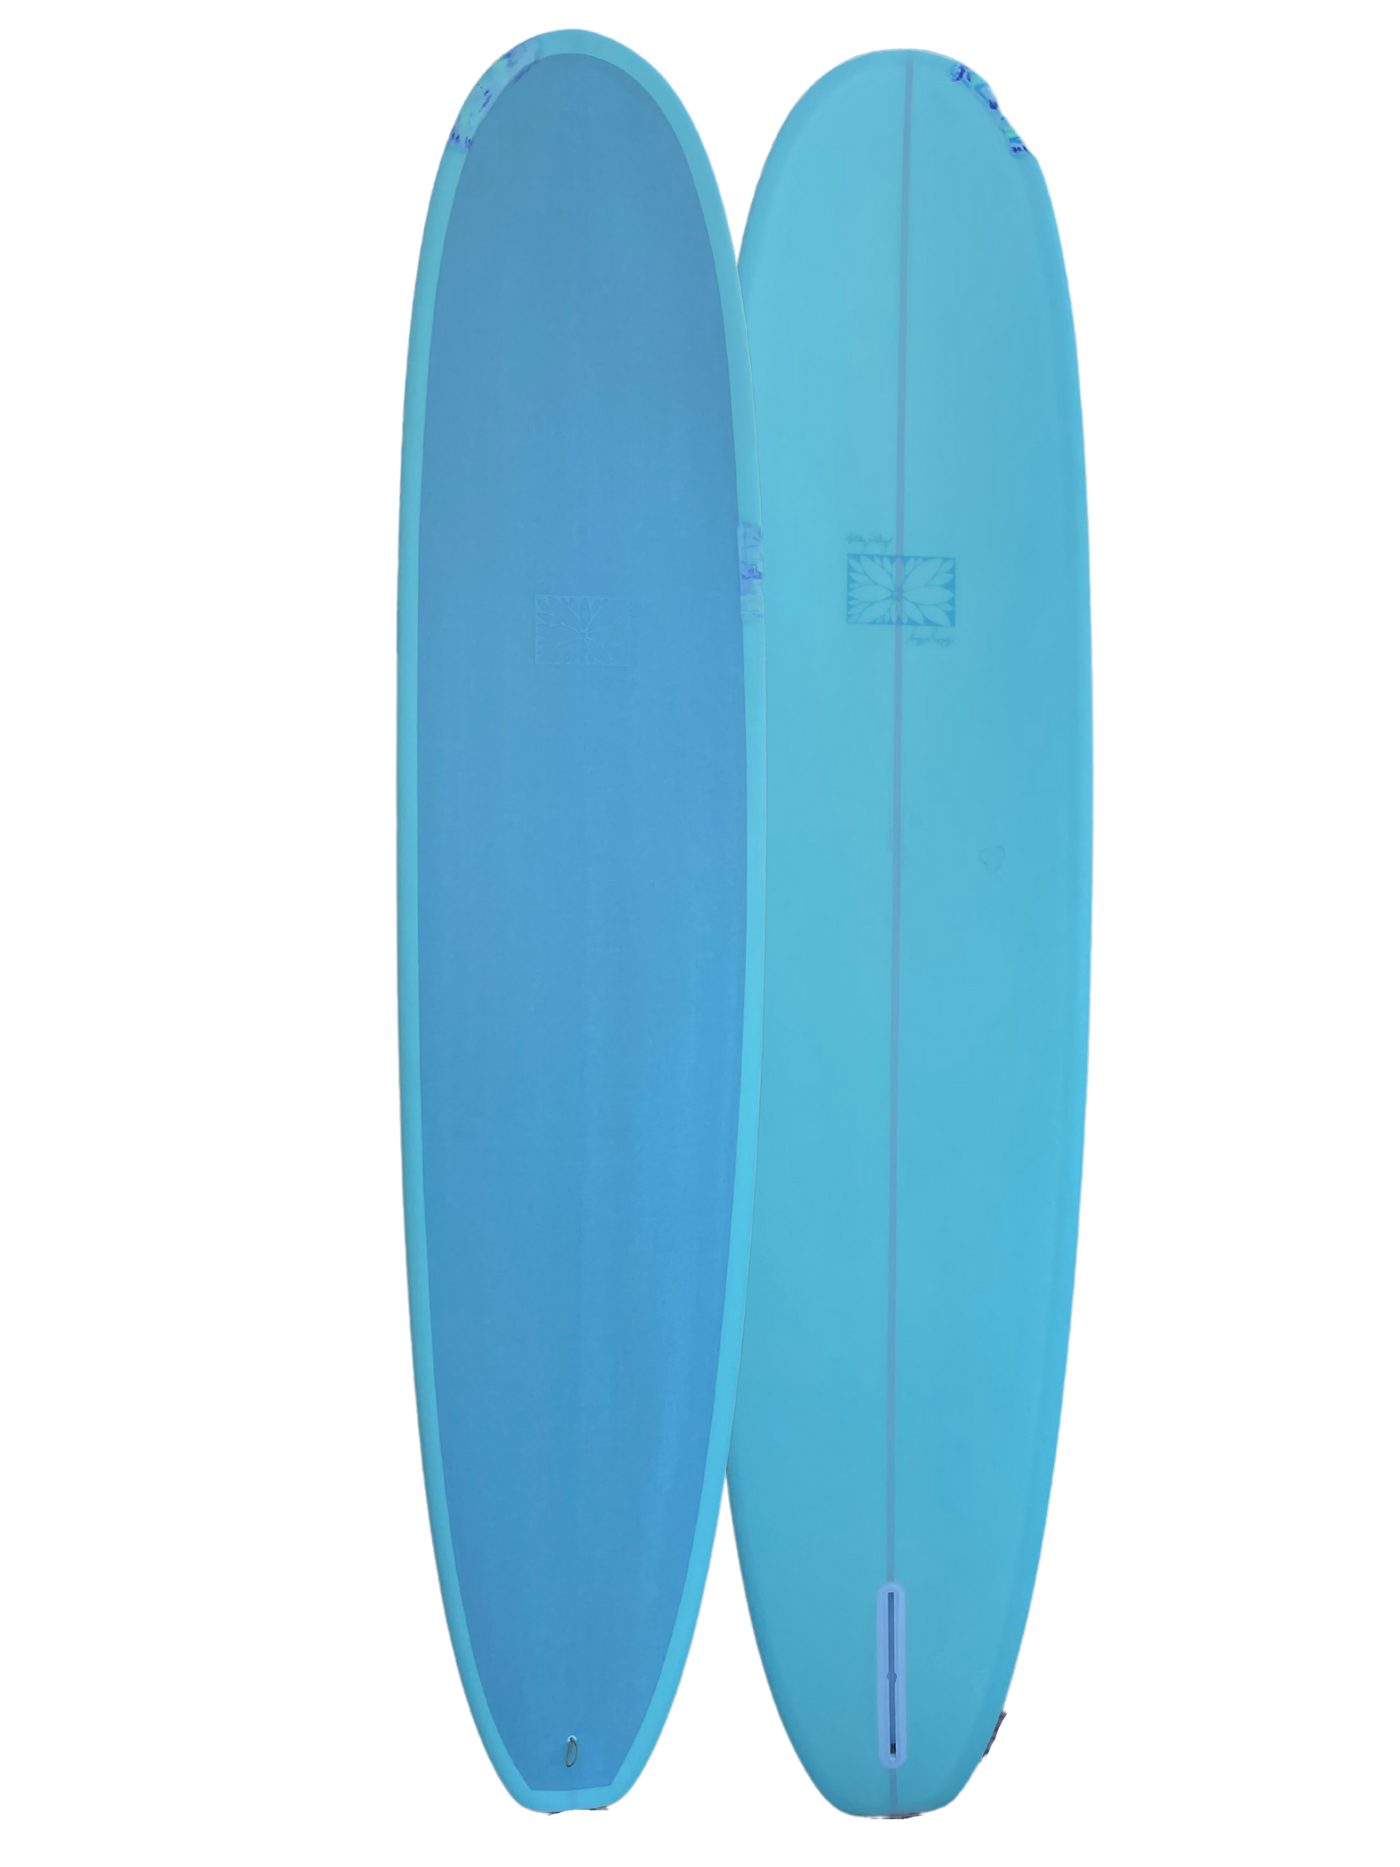 USED 9'3 Lovely Noserider